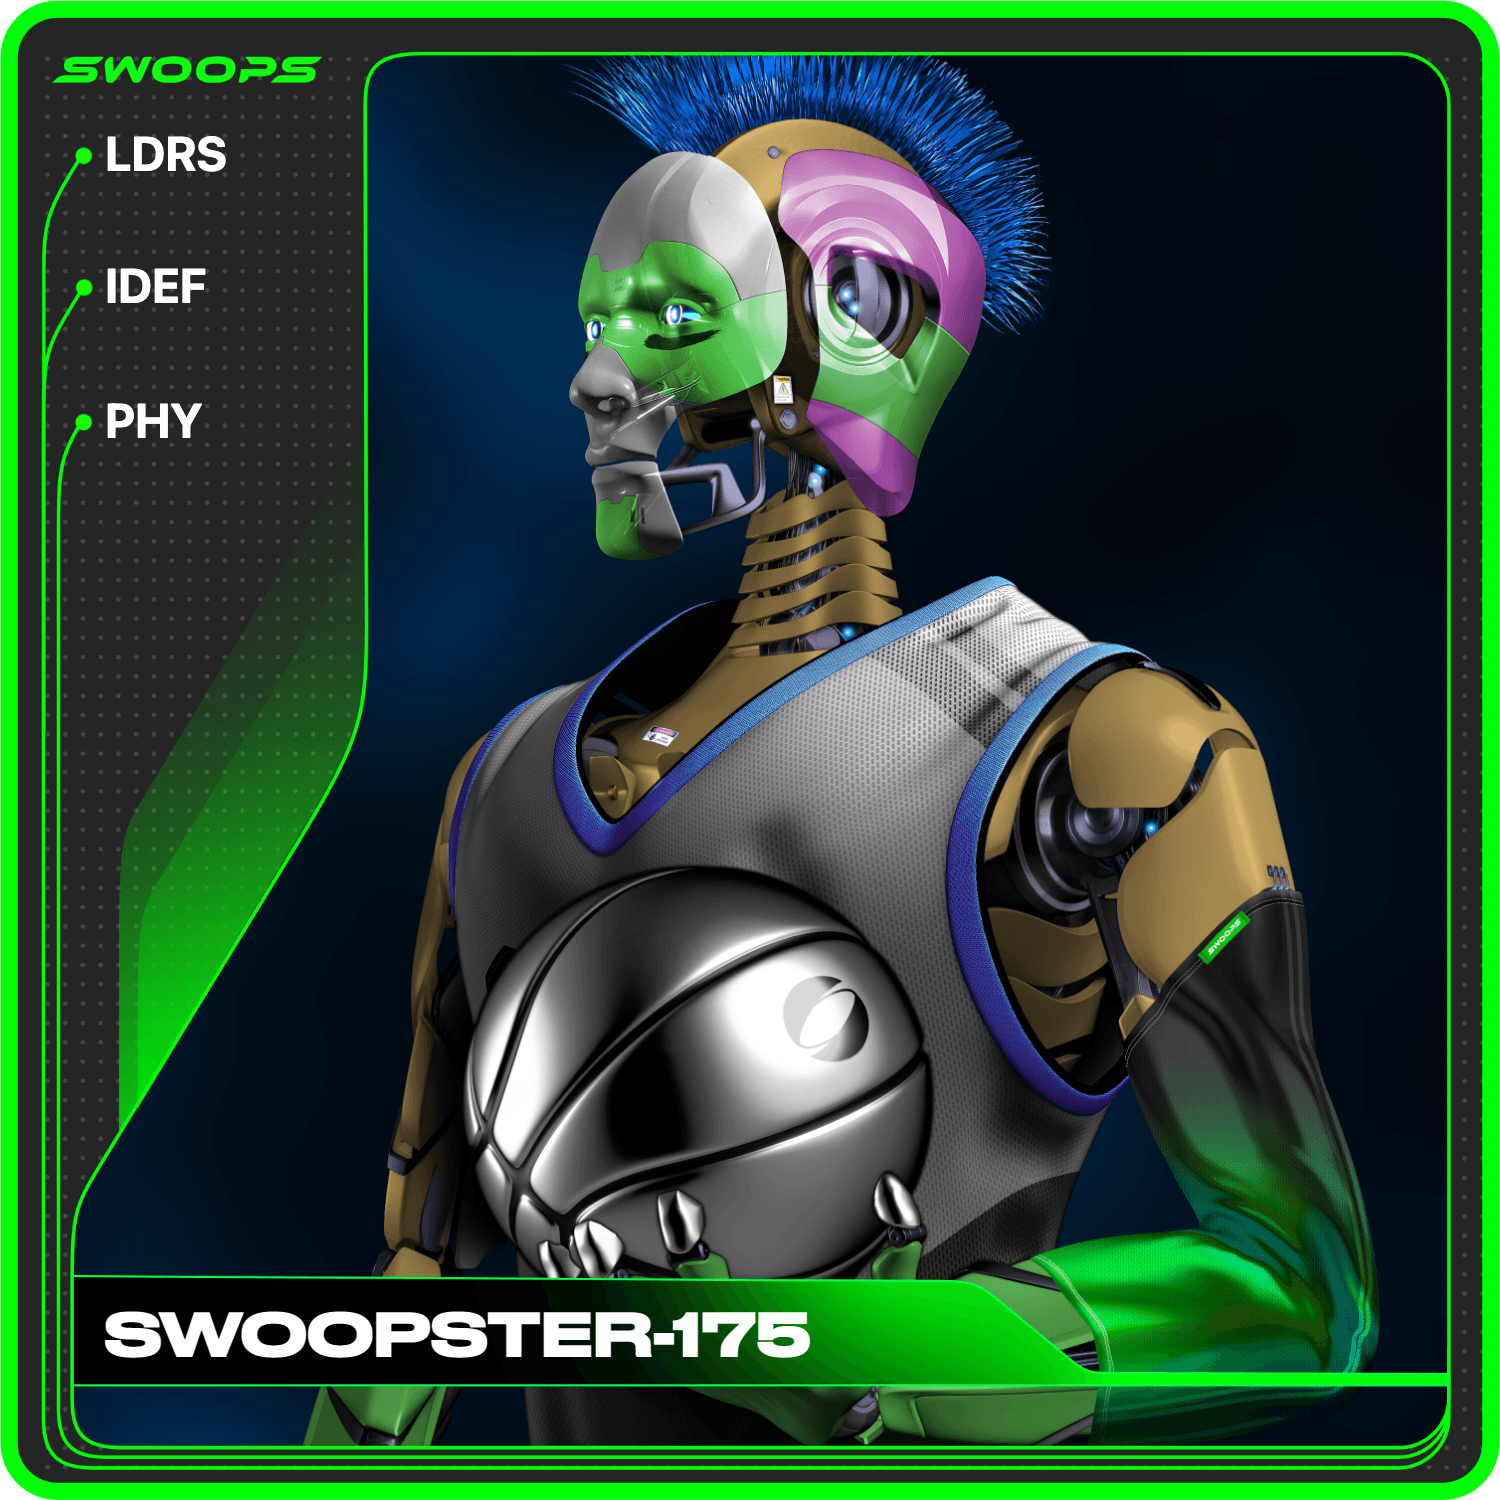 SWOOPSTER-175